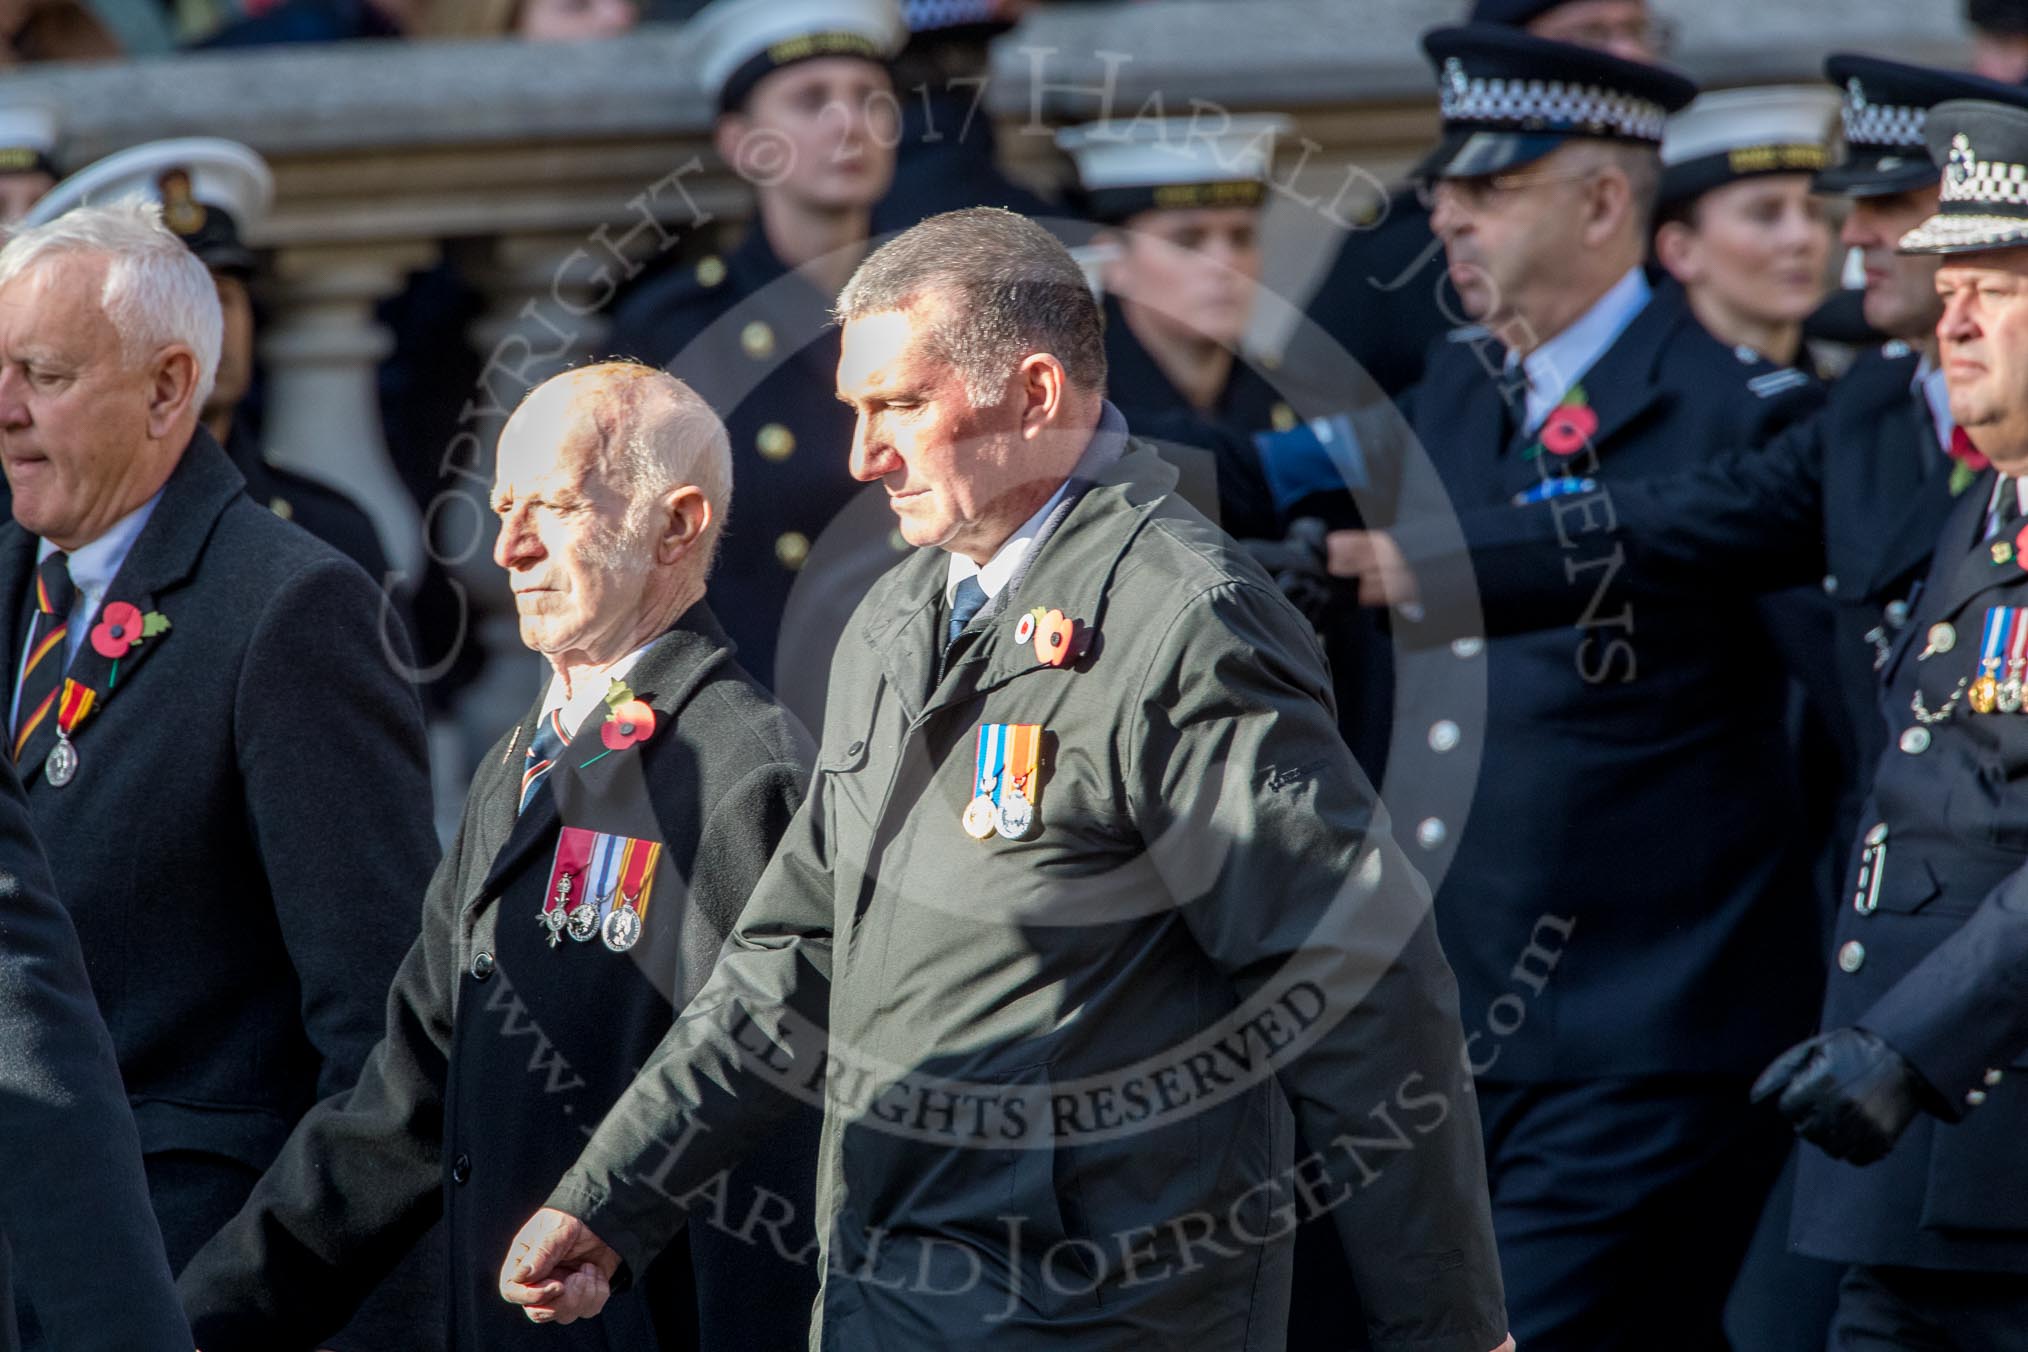 The Firefighters Memorial Trust (Group M16, 25 members) during the Royal British Legion March Past on Remembrance Sunday at the Cenotaph, Whitehall, Westminster, London, 11 November 2018, 12:26.